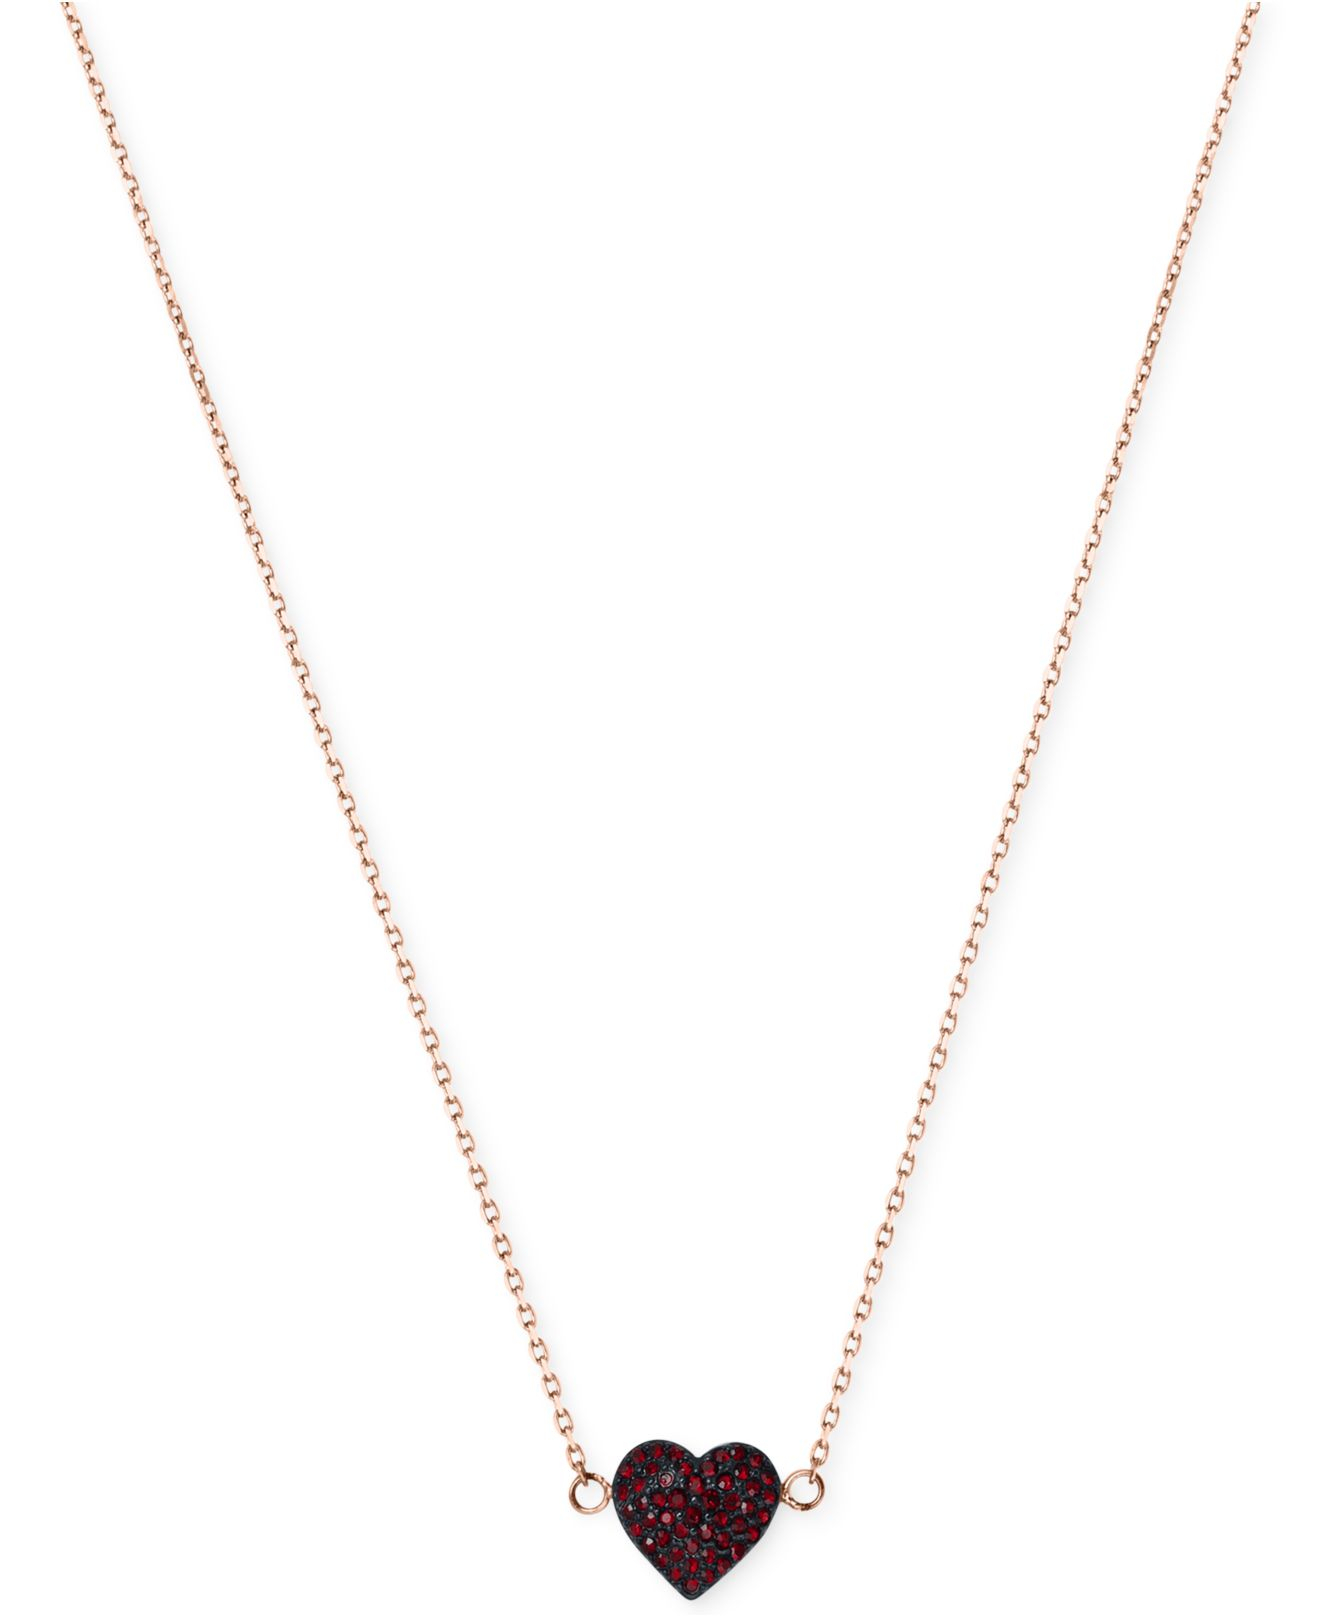 Two-Tone Heart Pendant Necklace in Ruby 